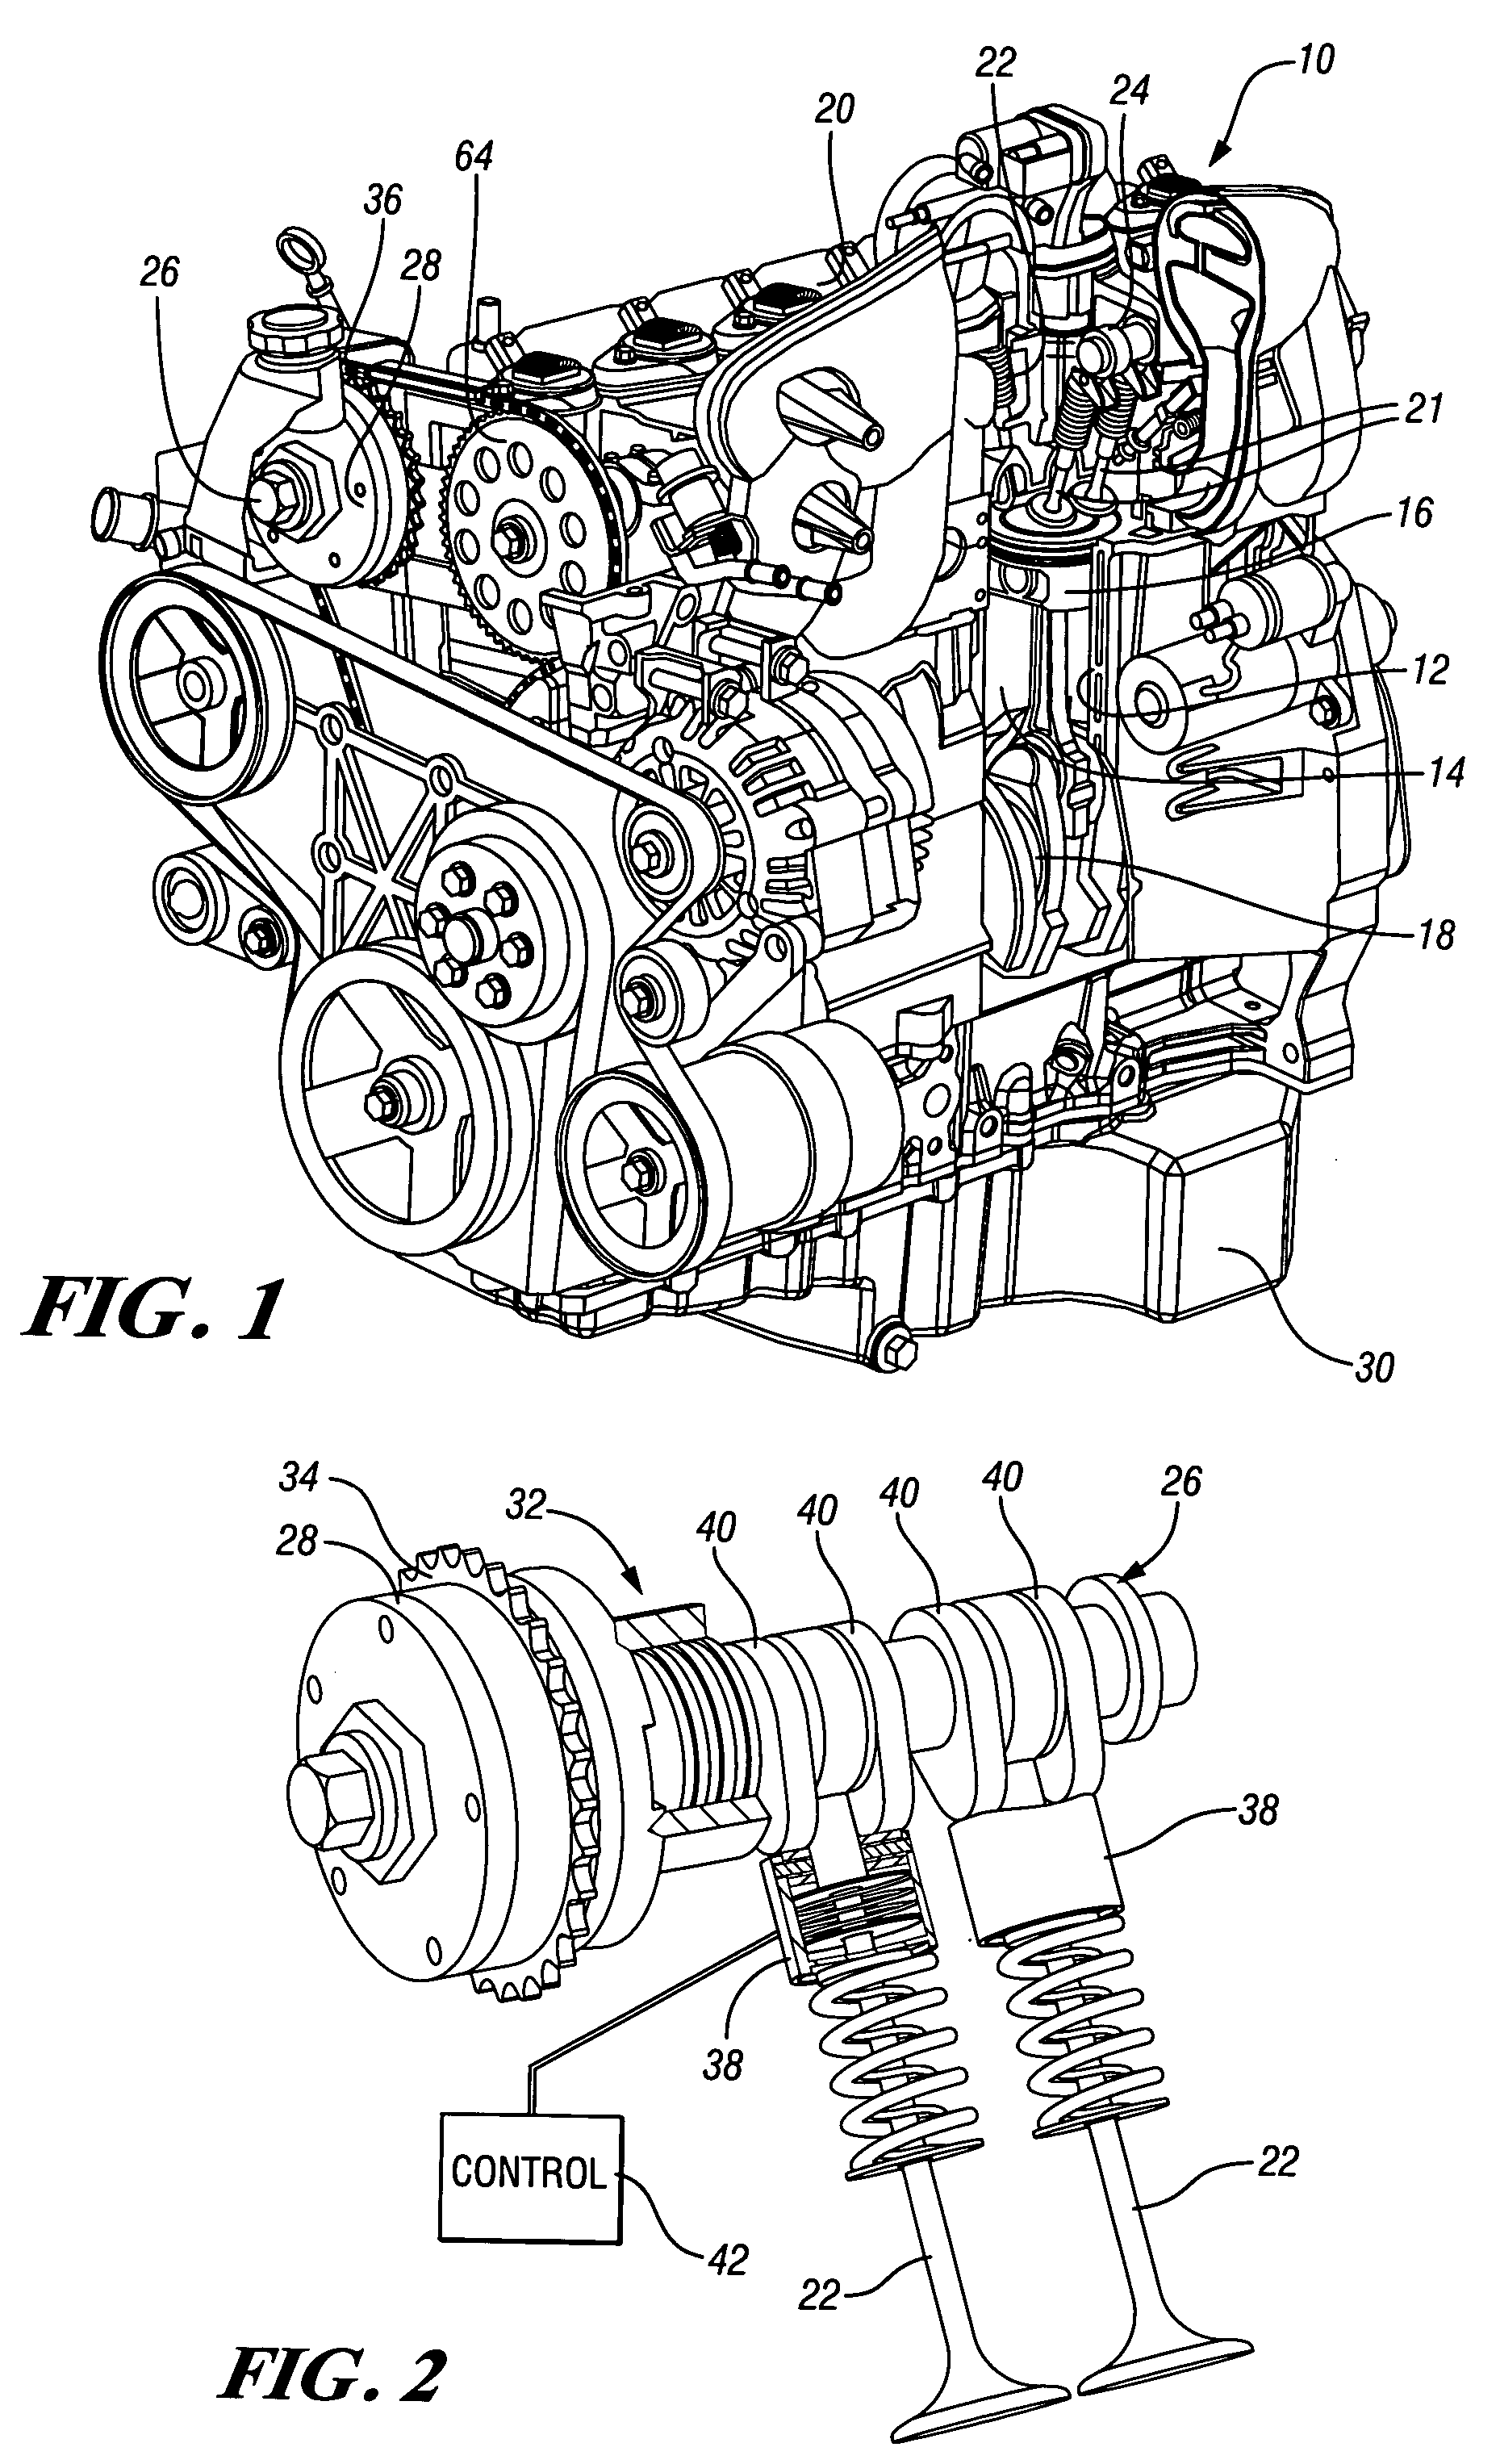 Engine oil system with oil pressure regulator to increase cam phaser oil pressure